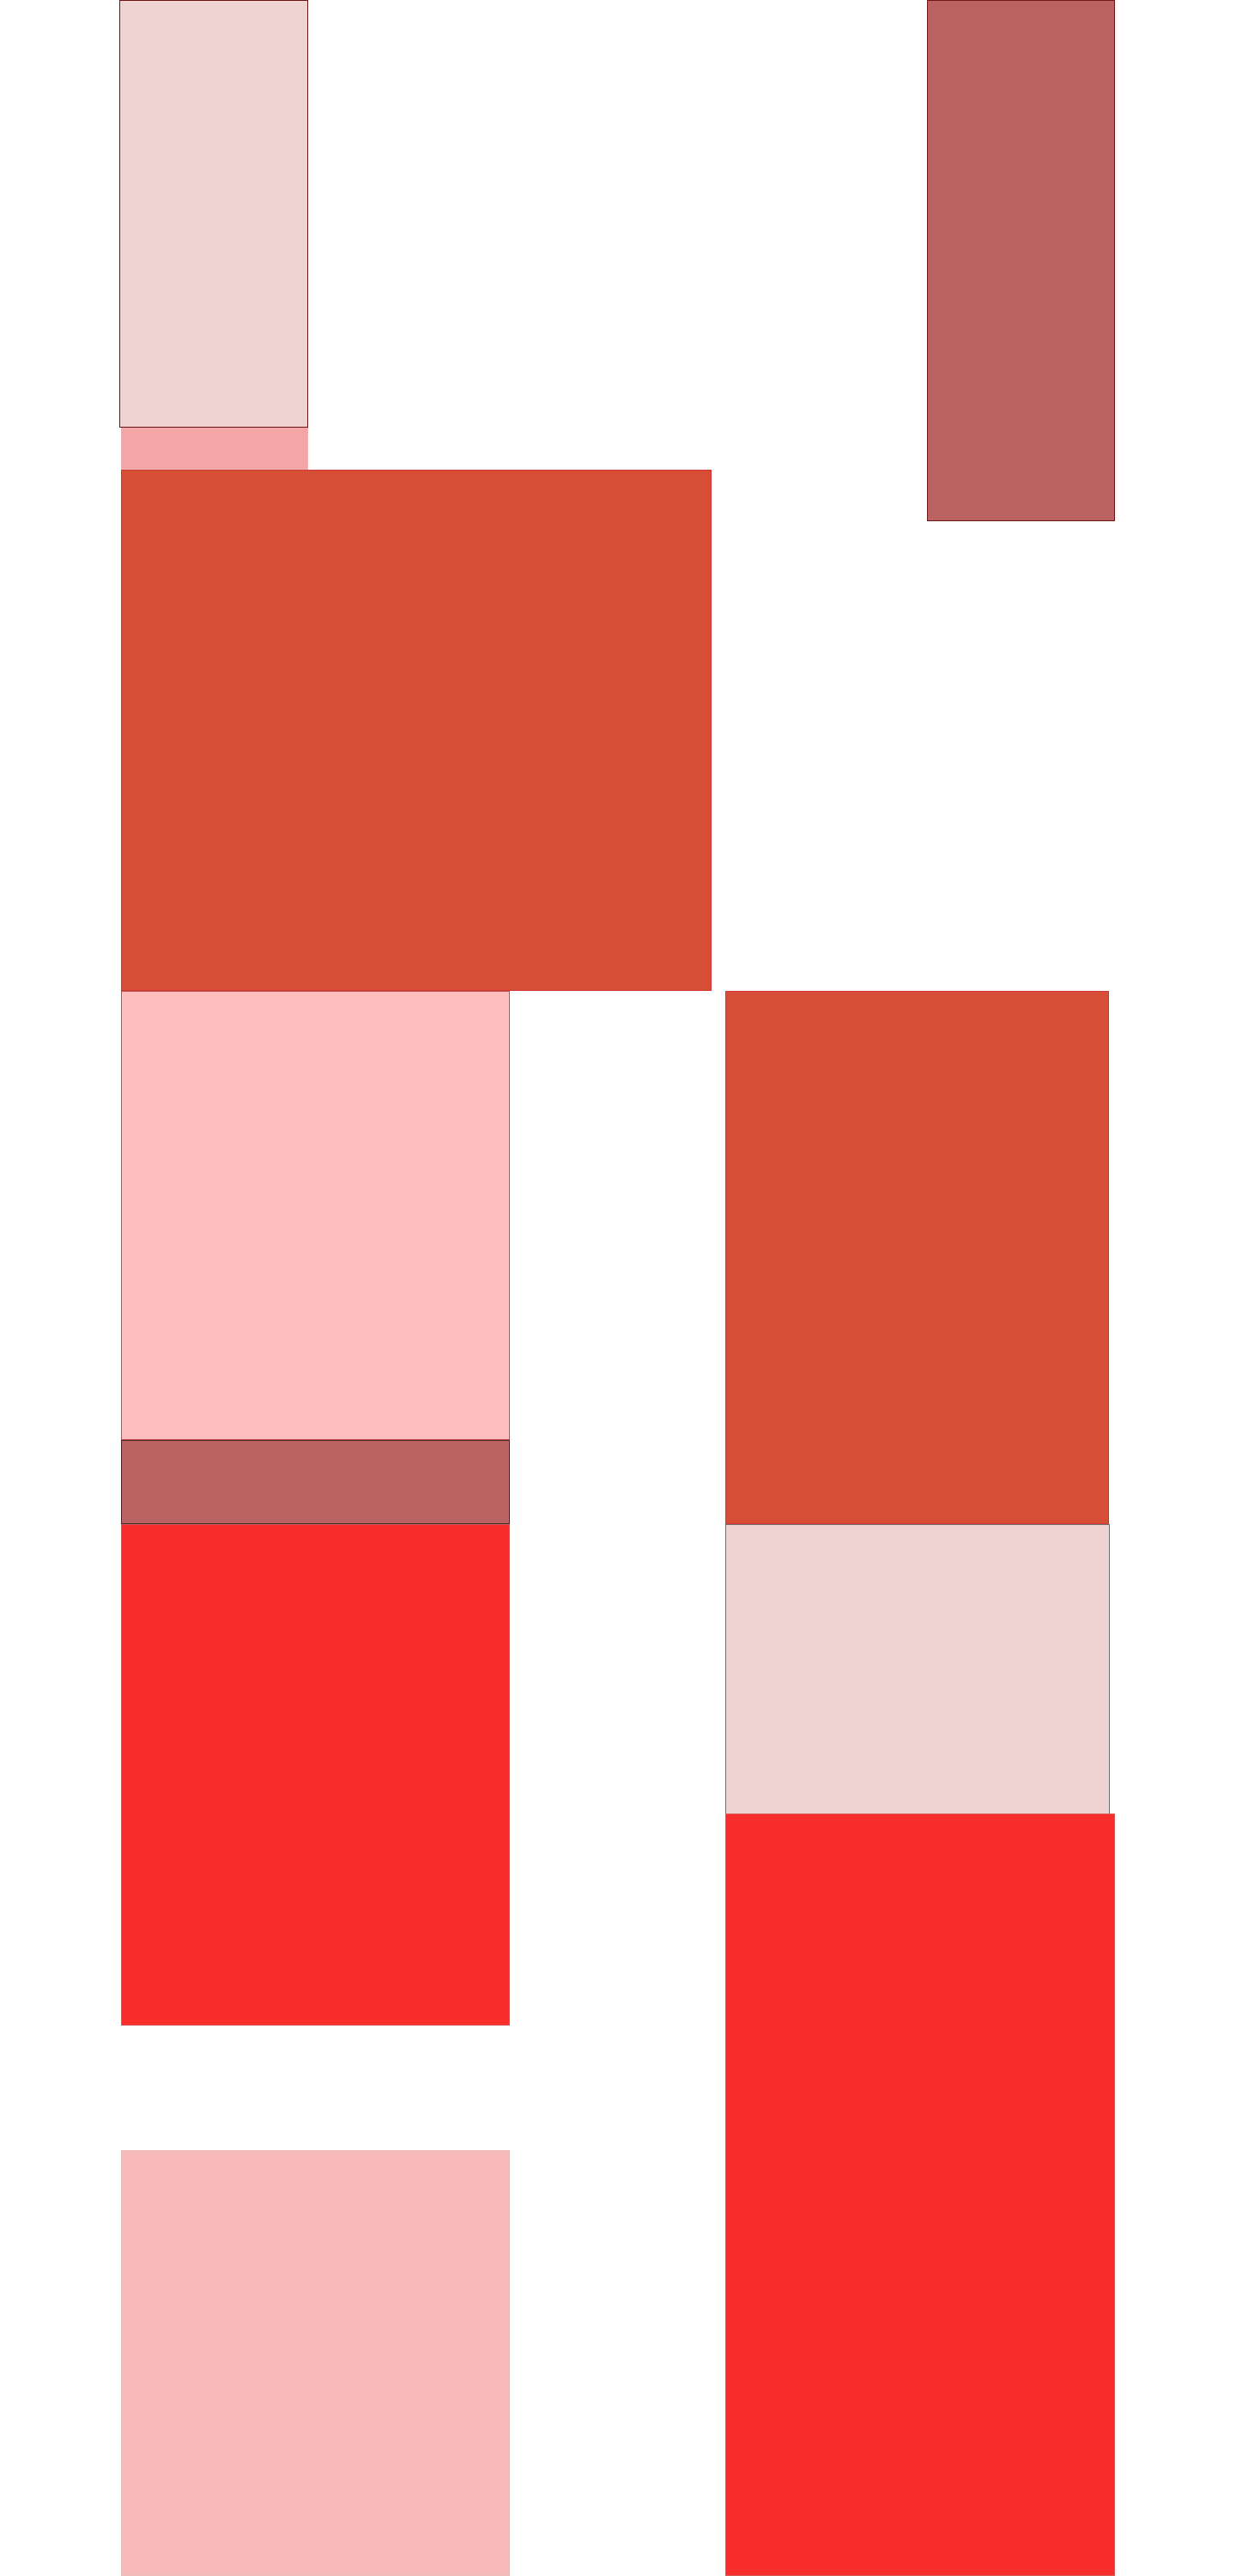 pink and red rectangles